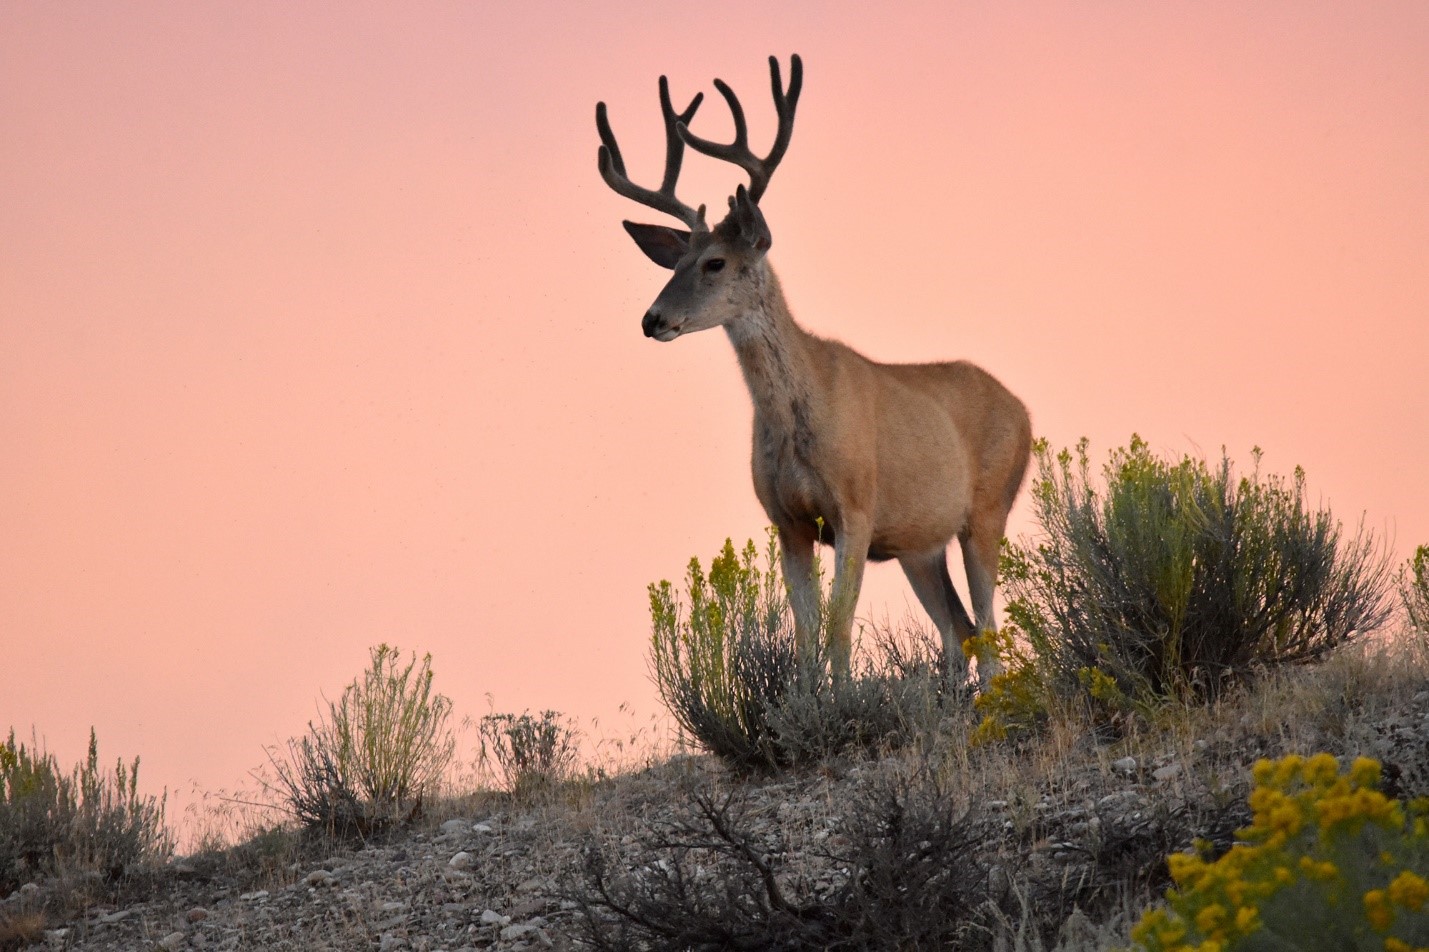 A mule deer with antlers and a pinkish-orange sky in the background.